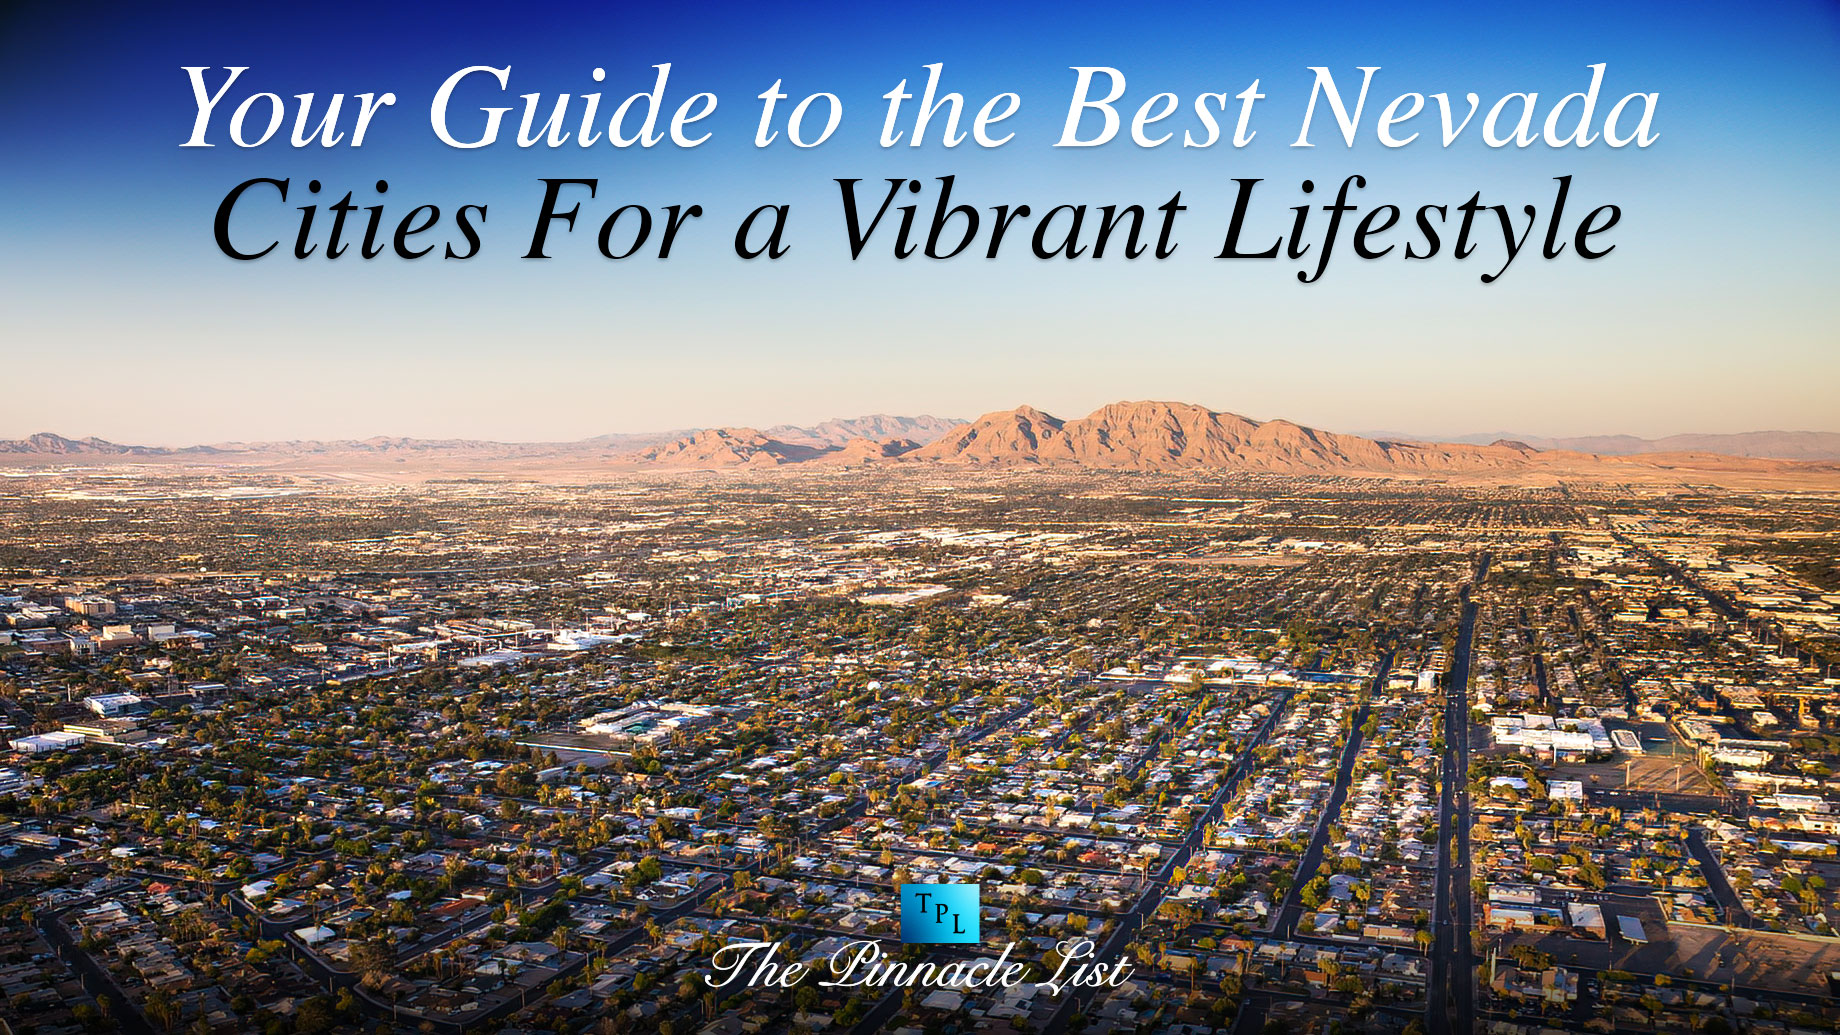 Your Guide to the Best Nevada Cities for a Vibrant Lifestyle